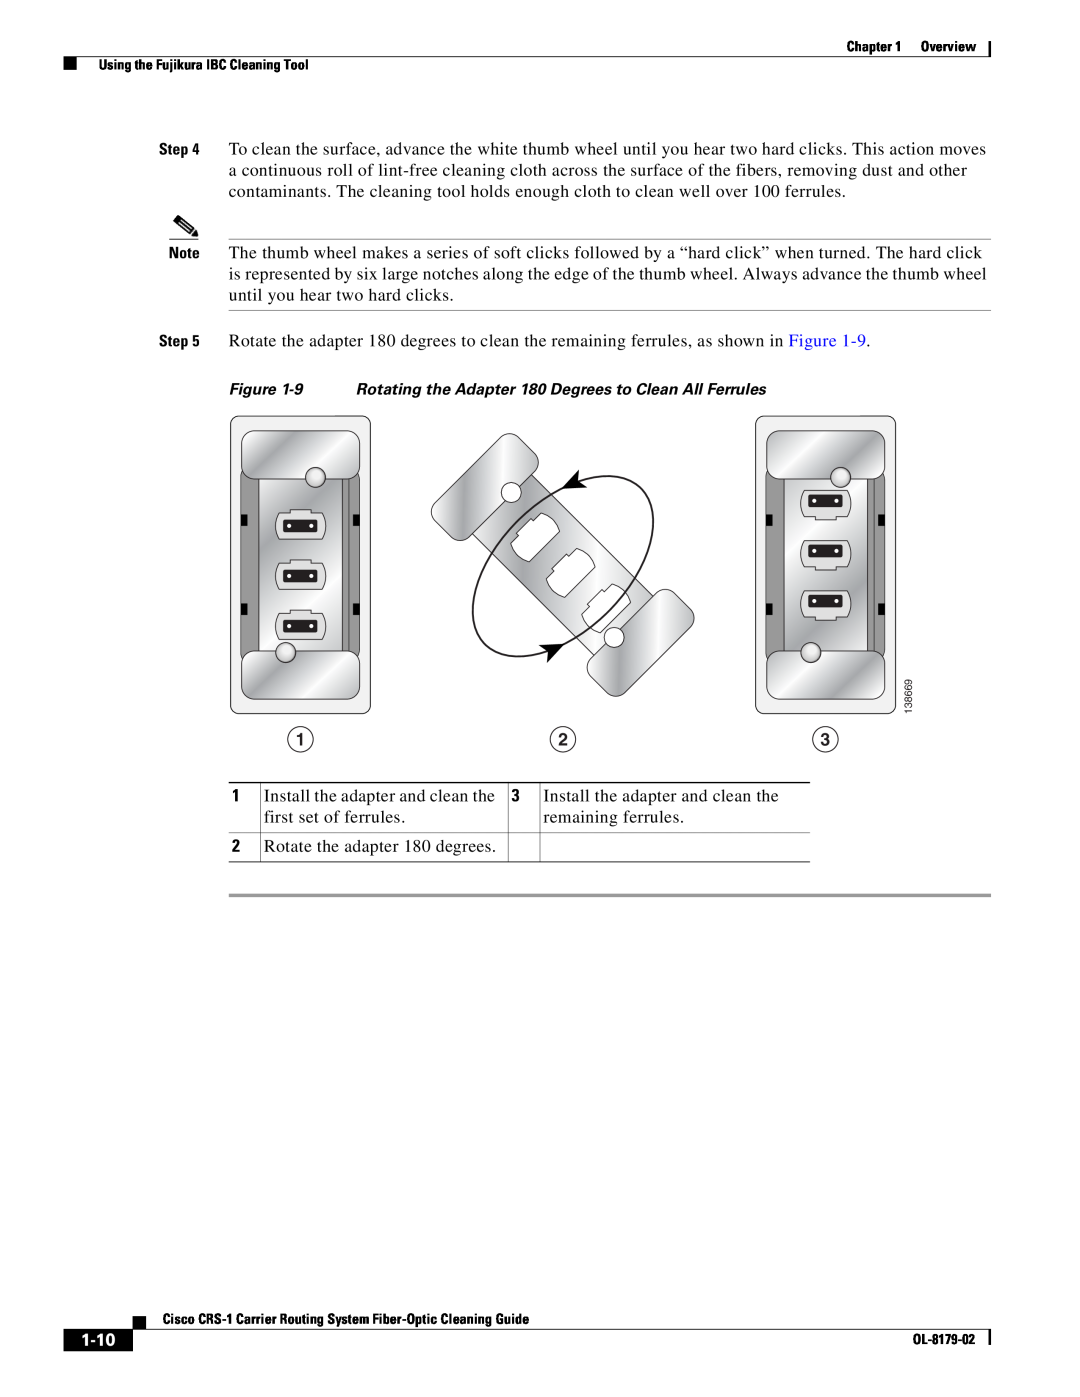 Cisco Systems CRS-1 manual 1-10, Install the adapter and clean the 